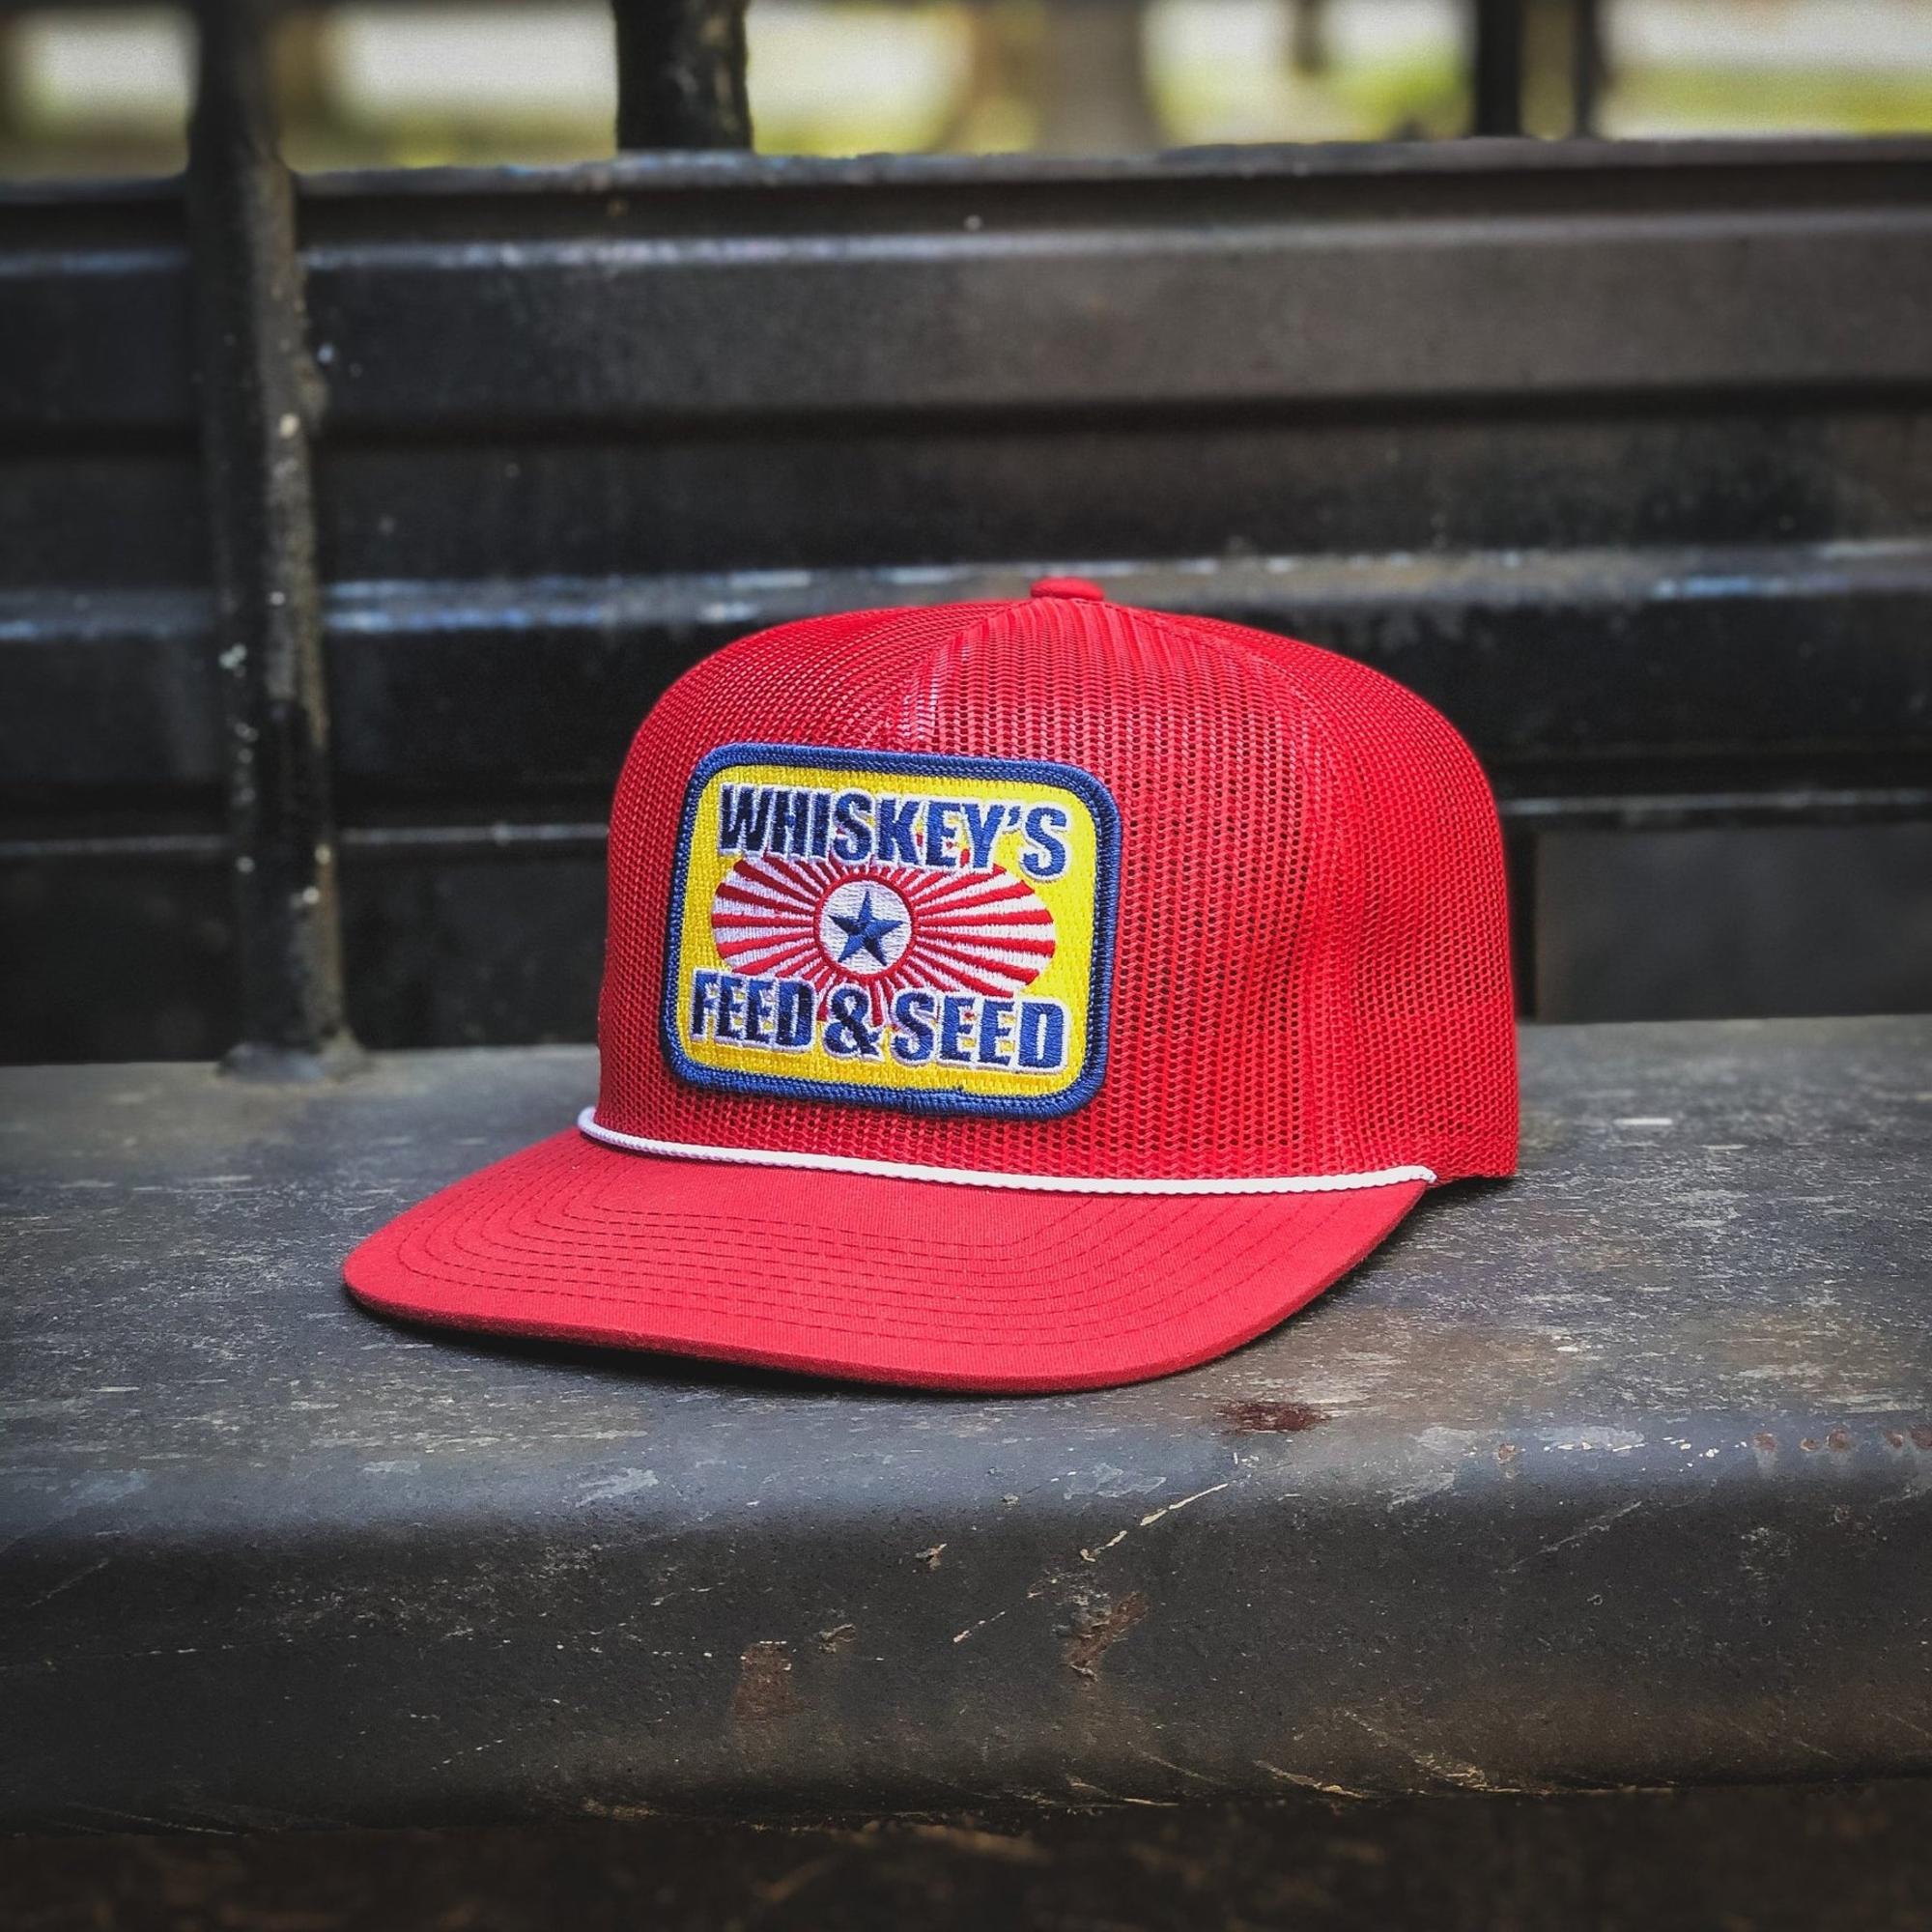 The Throwback Trucker Hat